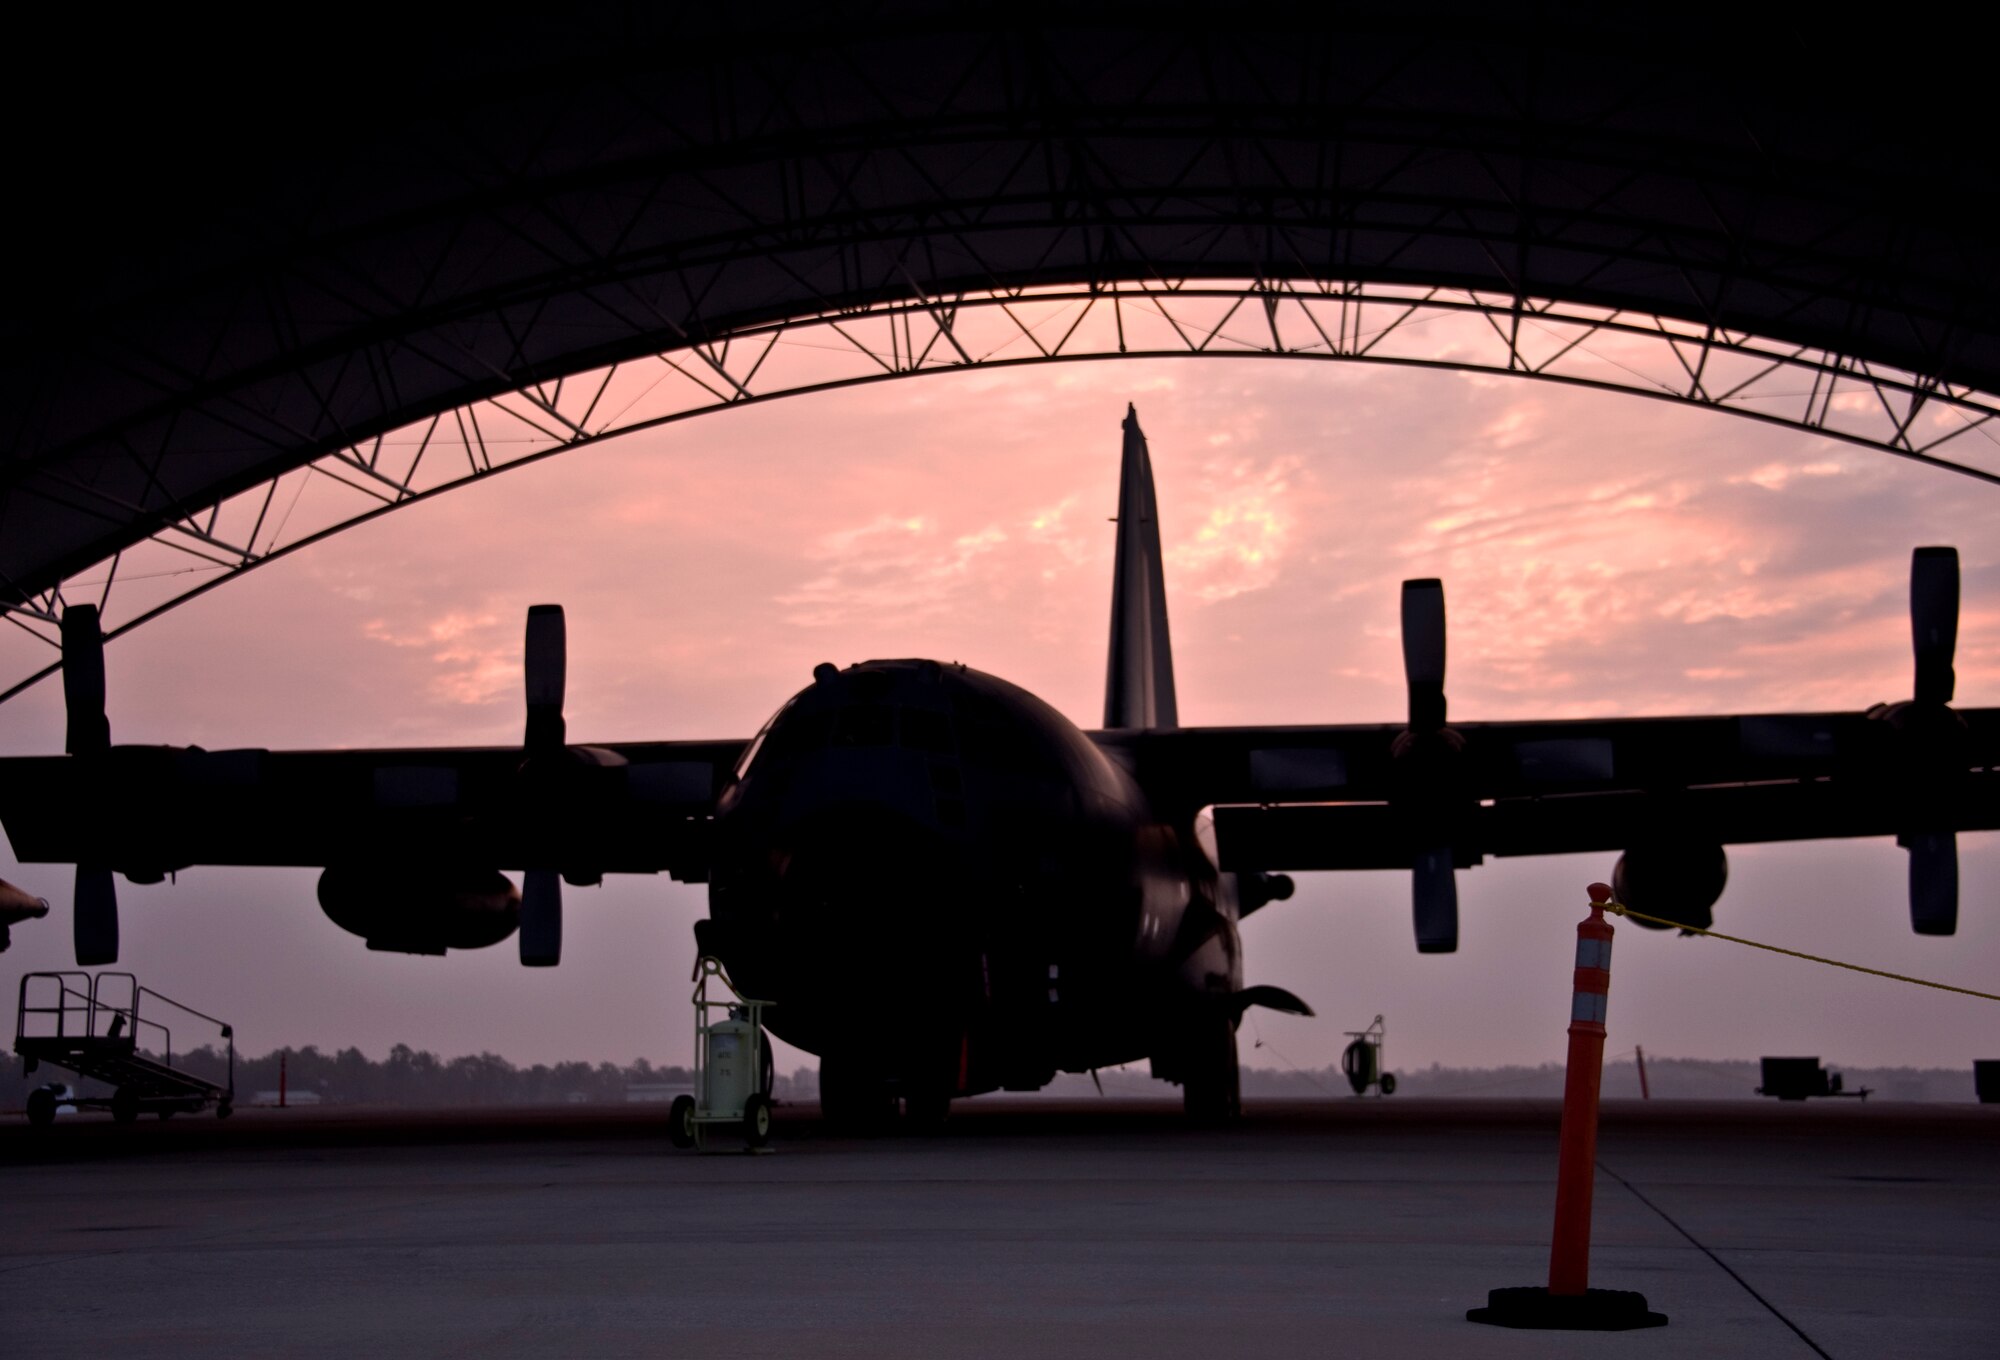 Day breaks on behind a 919th Special Operations Wing MC-130E Combat Talon April 2 at Duke Field.  The wing provides and maintains the Combat Talon special operations aircraft designed for covert operations. (U.S. Air Force photo/Tech. Sgt. Samuel King Jr.)